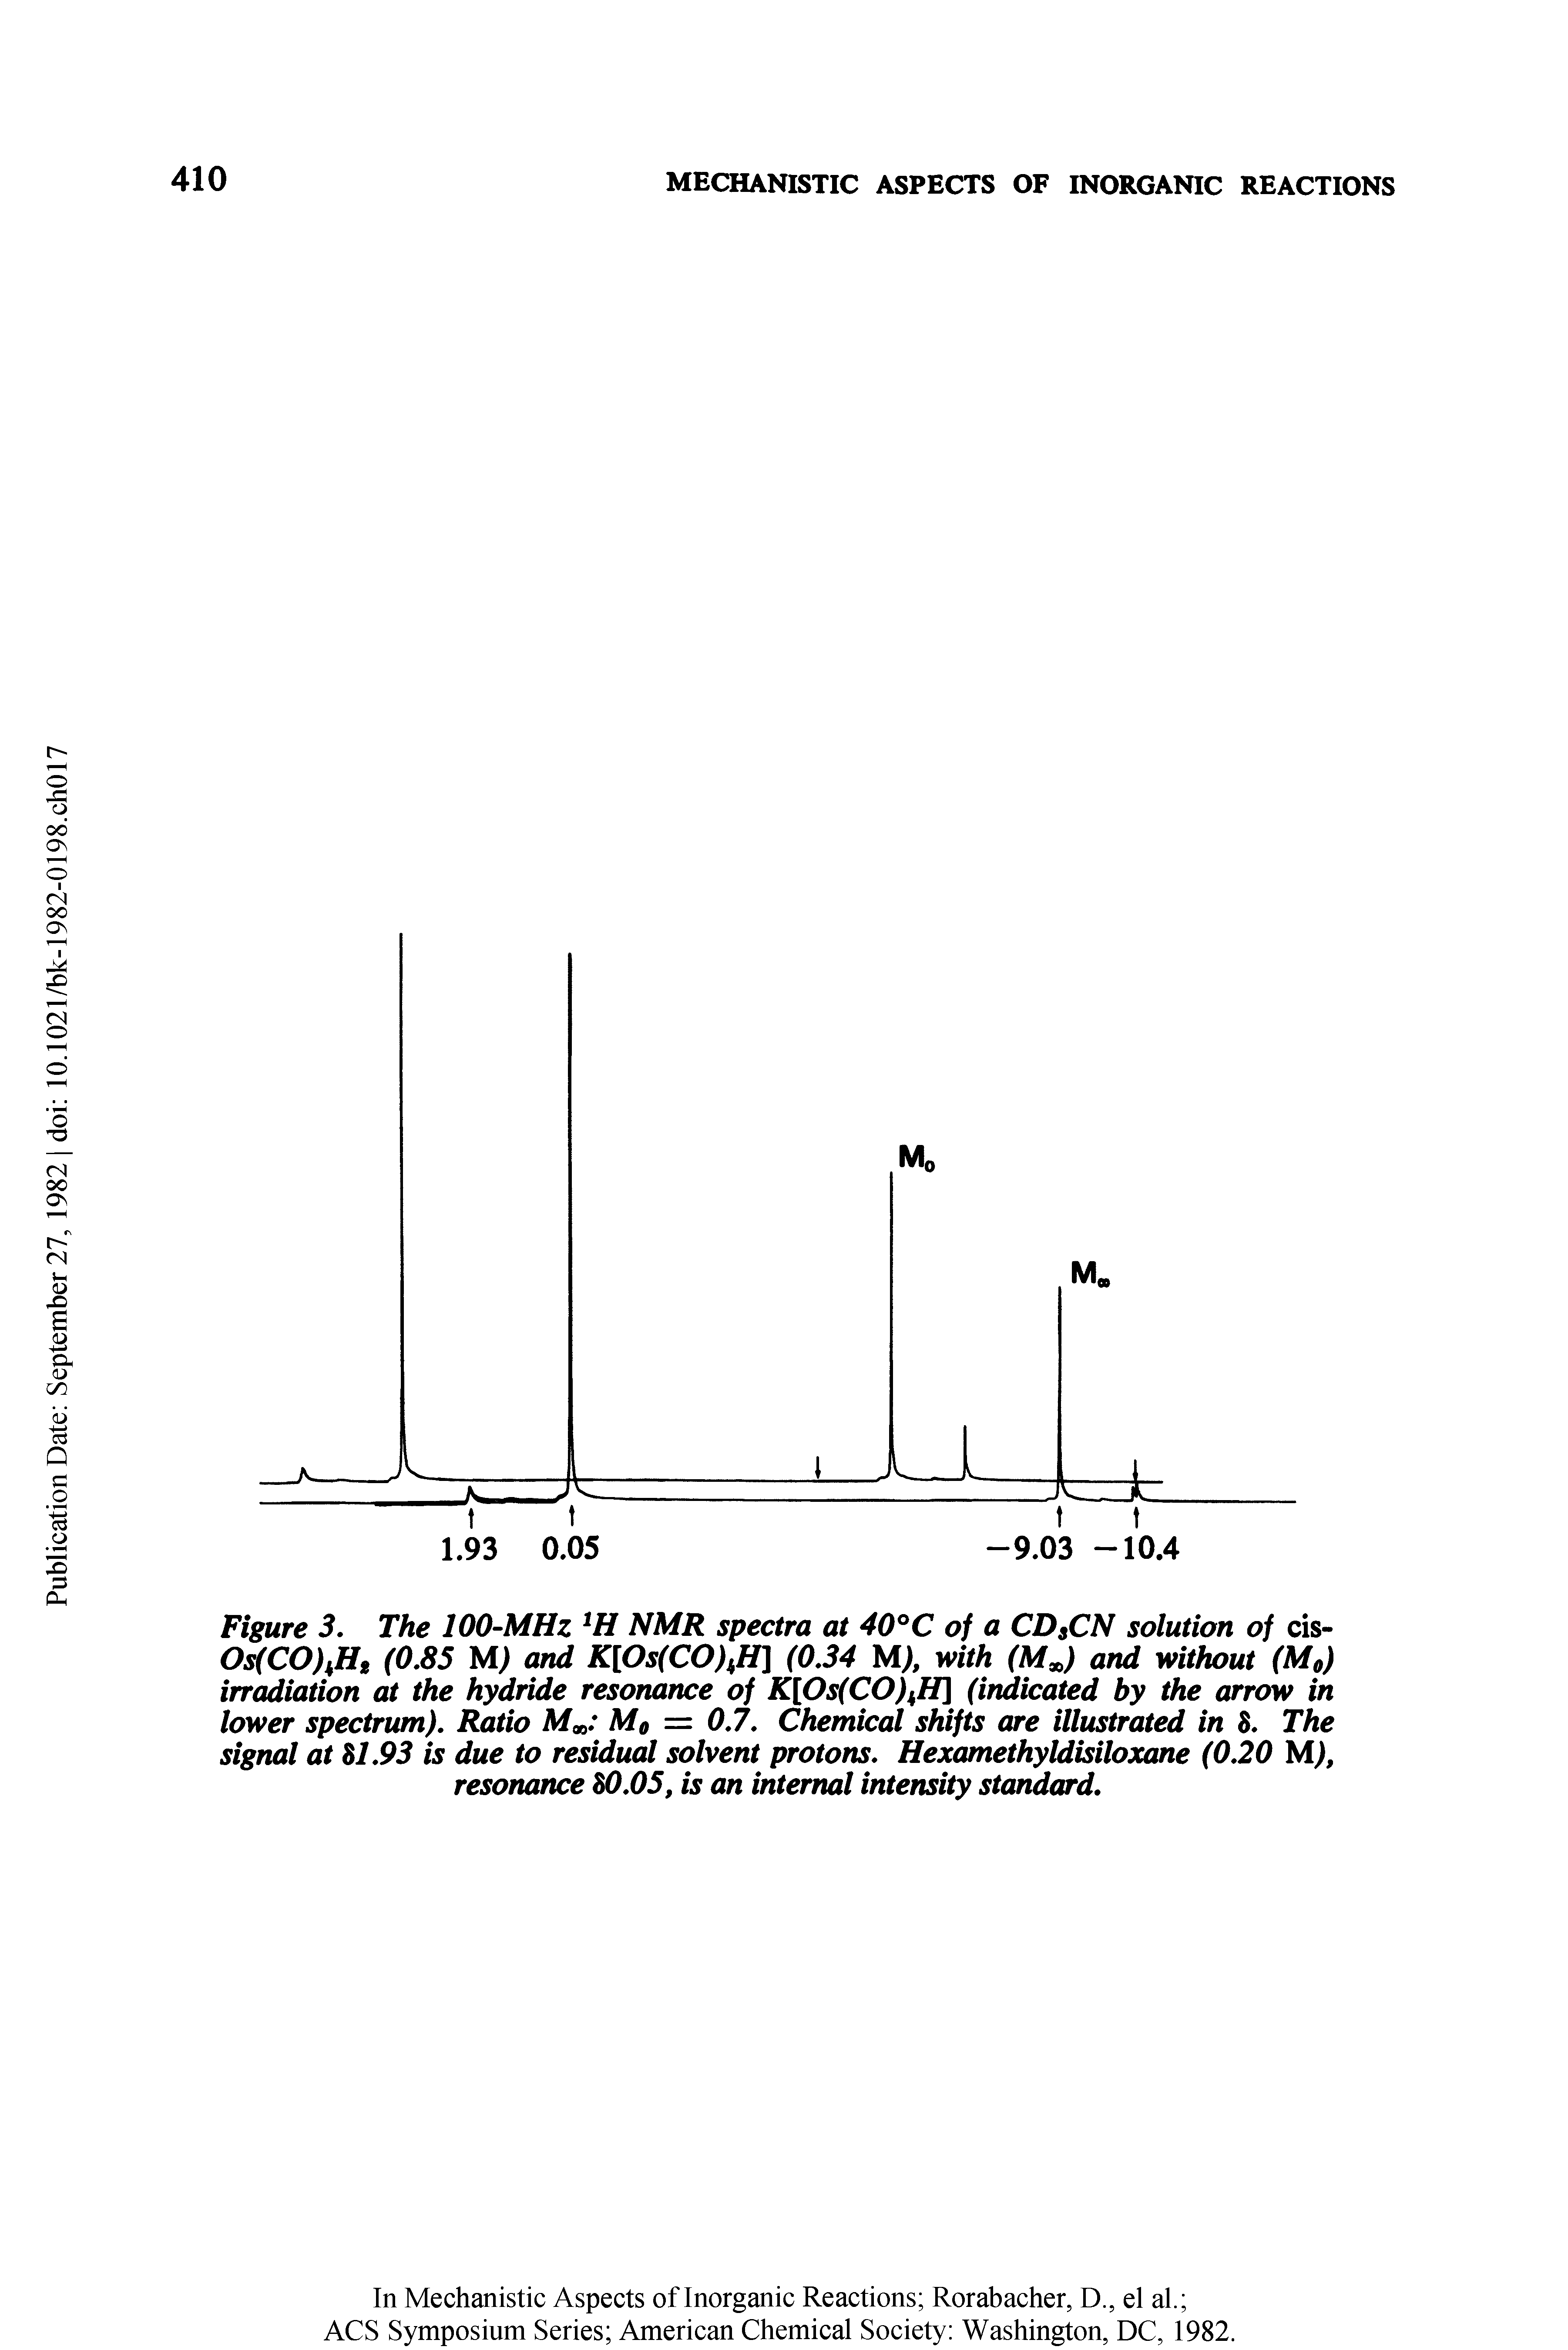 Figure 3. The 100-MHz 1H NMR spectra at 40°C of a CDtCN solution of cis-Os(CO)kHt (0.85 M) and K[Os(CO)kH] (0.34 M), with (MJ and without (M0) irradiation at the hydride resonance of K[Os(CO)kH (indicated by the arrow in lower spectrum). Ratio Mx M0 = 0.7. Chemical shifts are illustrated in 8. The signal at 81.93 is due to residual solvent protons. Hexamethyldisiloxane (0.20 M), resonance 80.05, is an internal intensity standard.